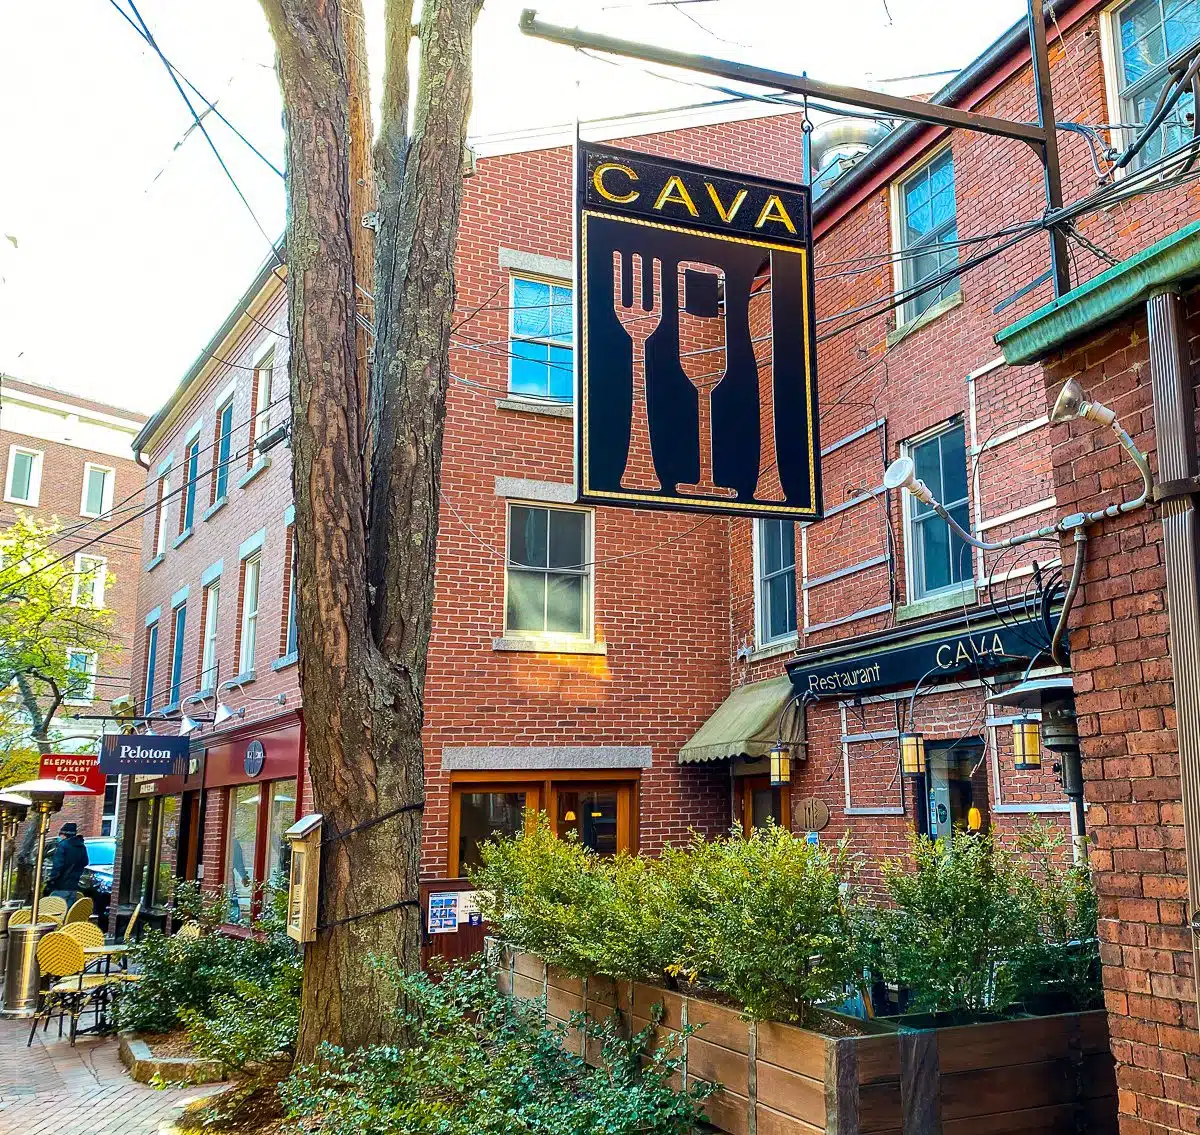 The outdoor dining patio of Cava, Portsmouth, NH.